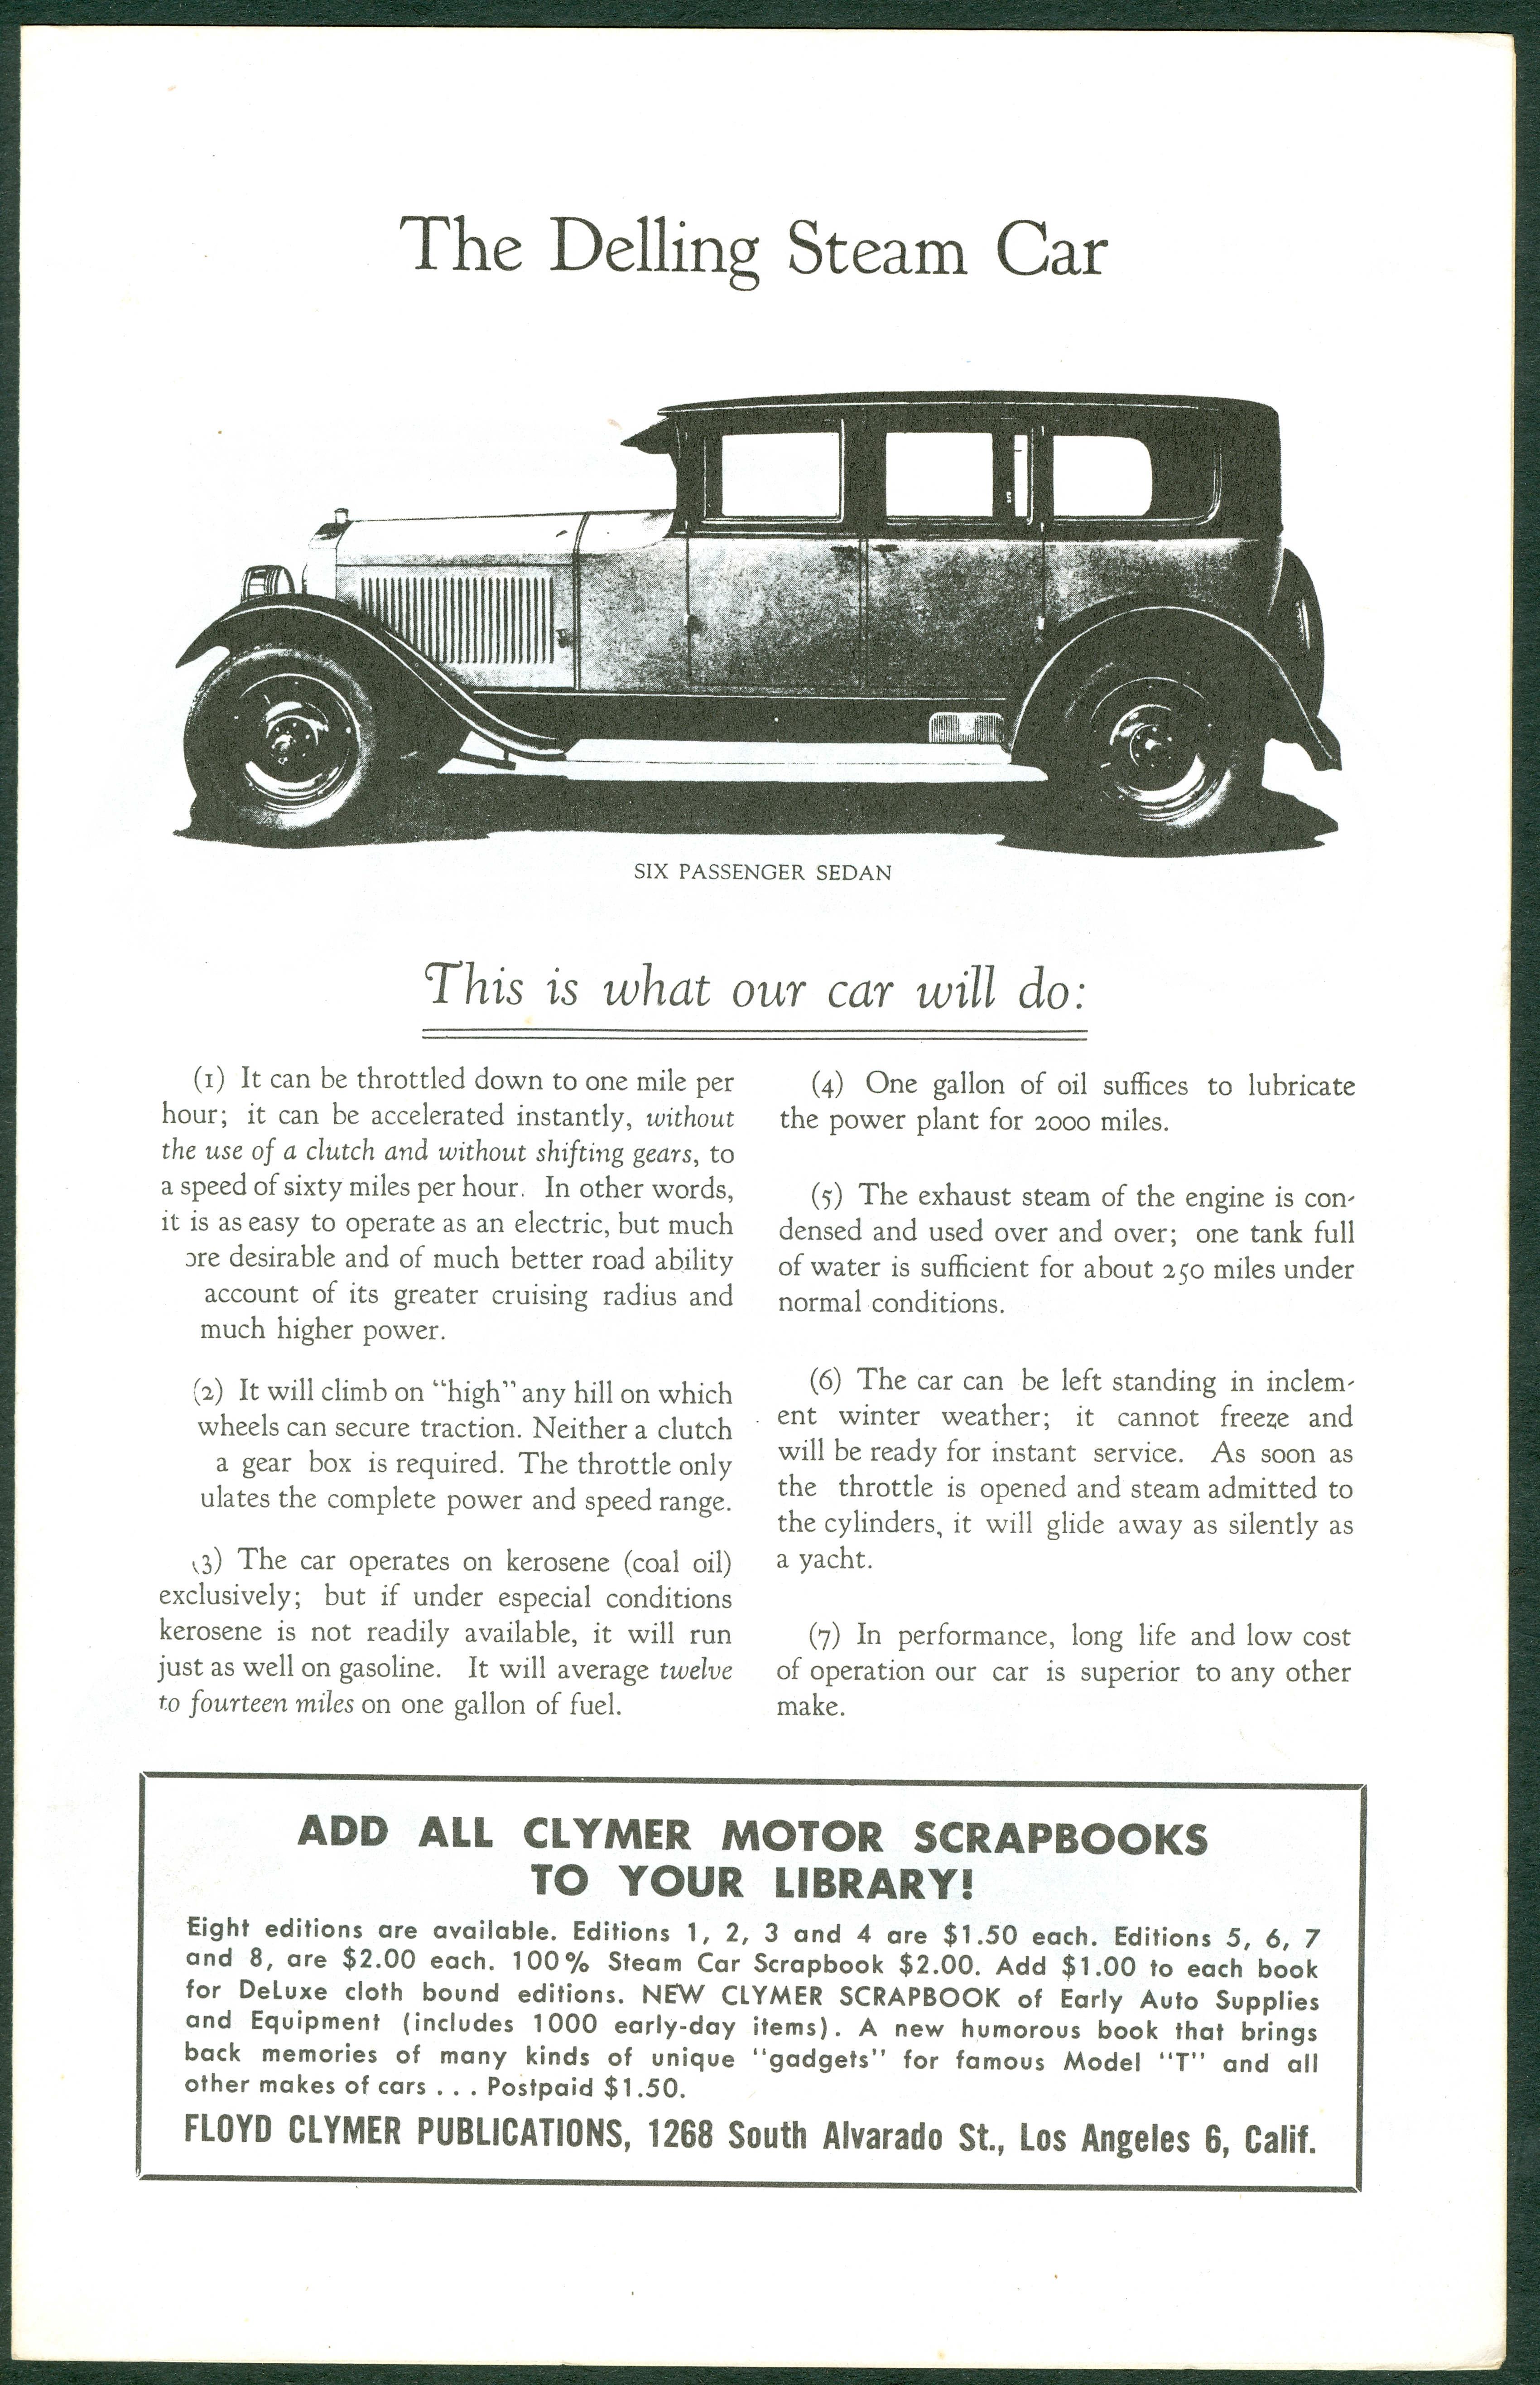 Delling Motors Company booklet assembled by Floyd Clymer p. 1